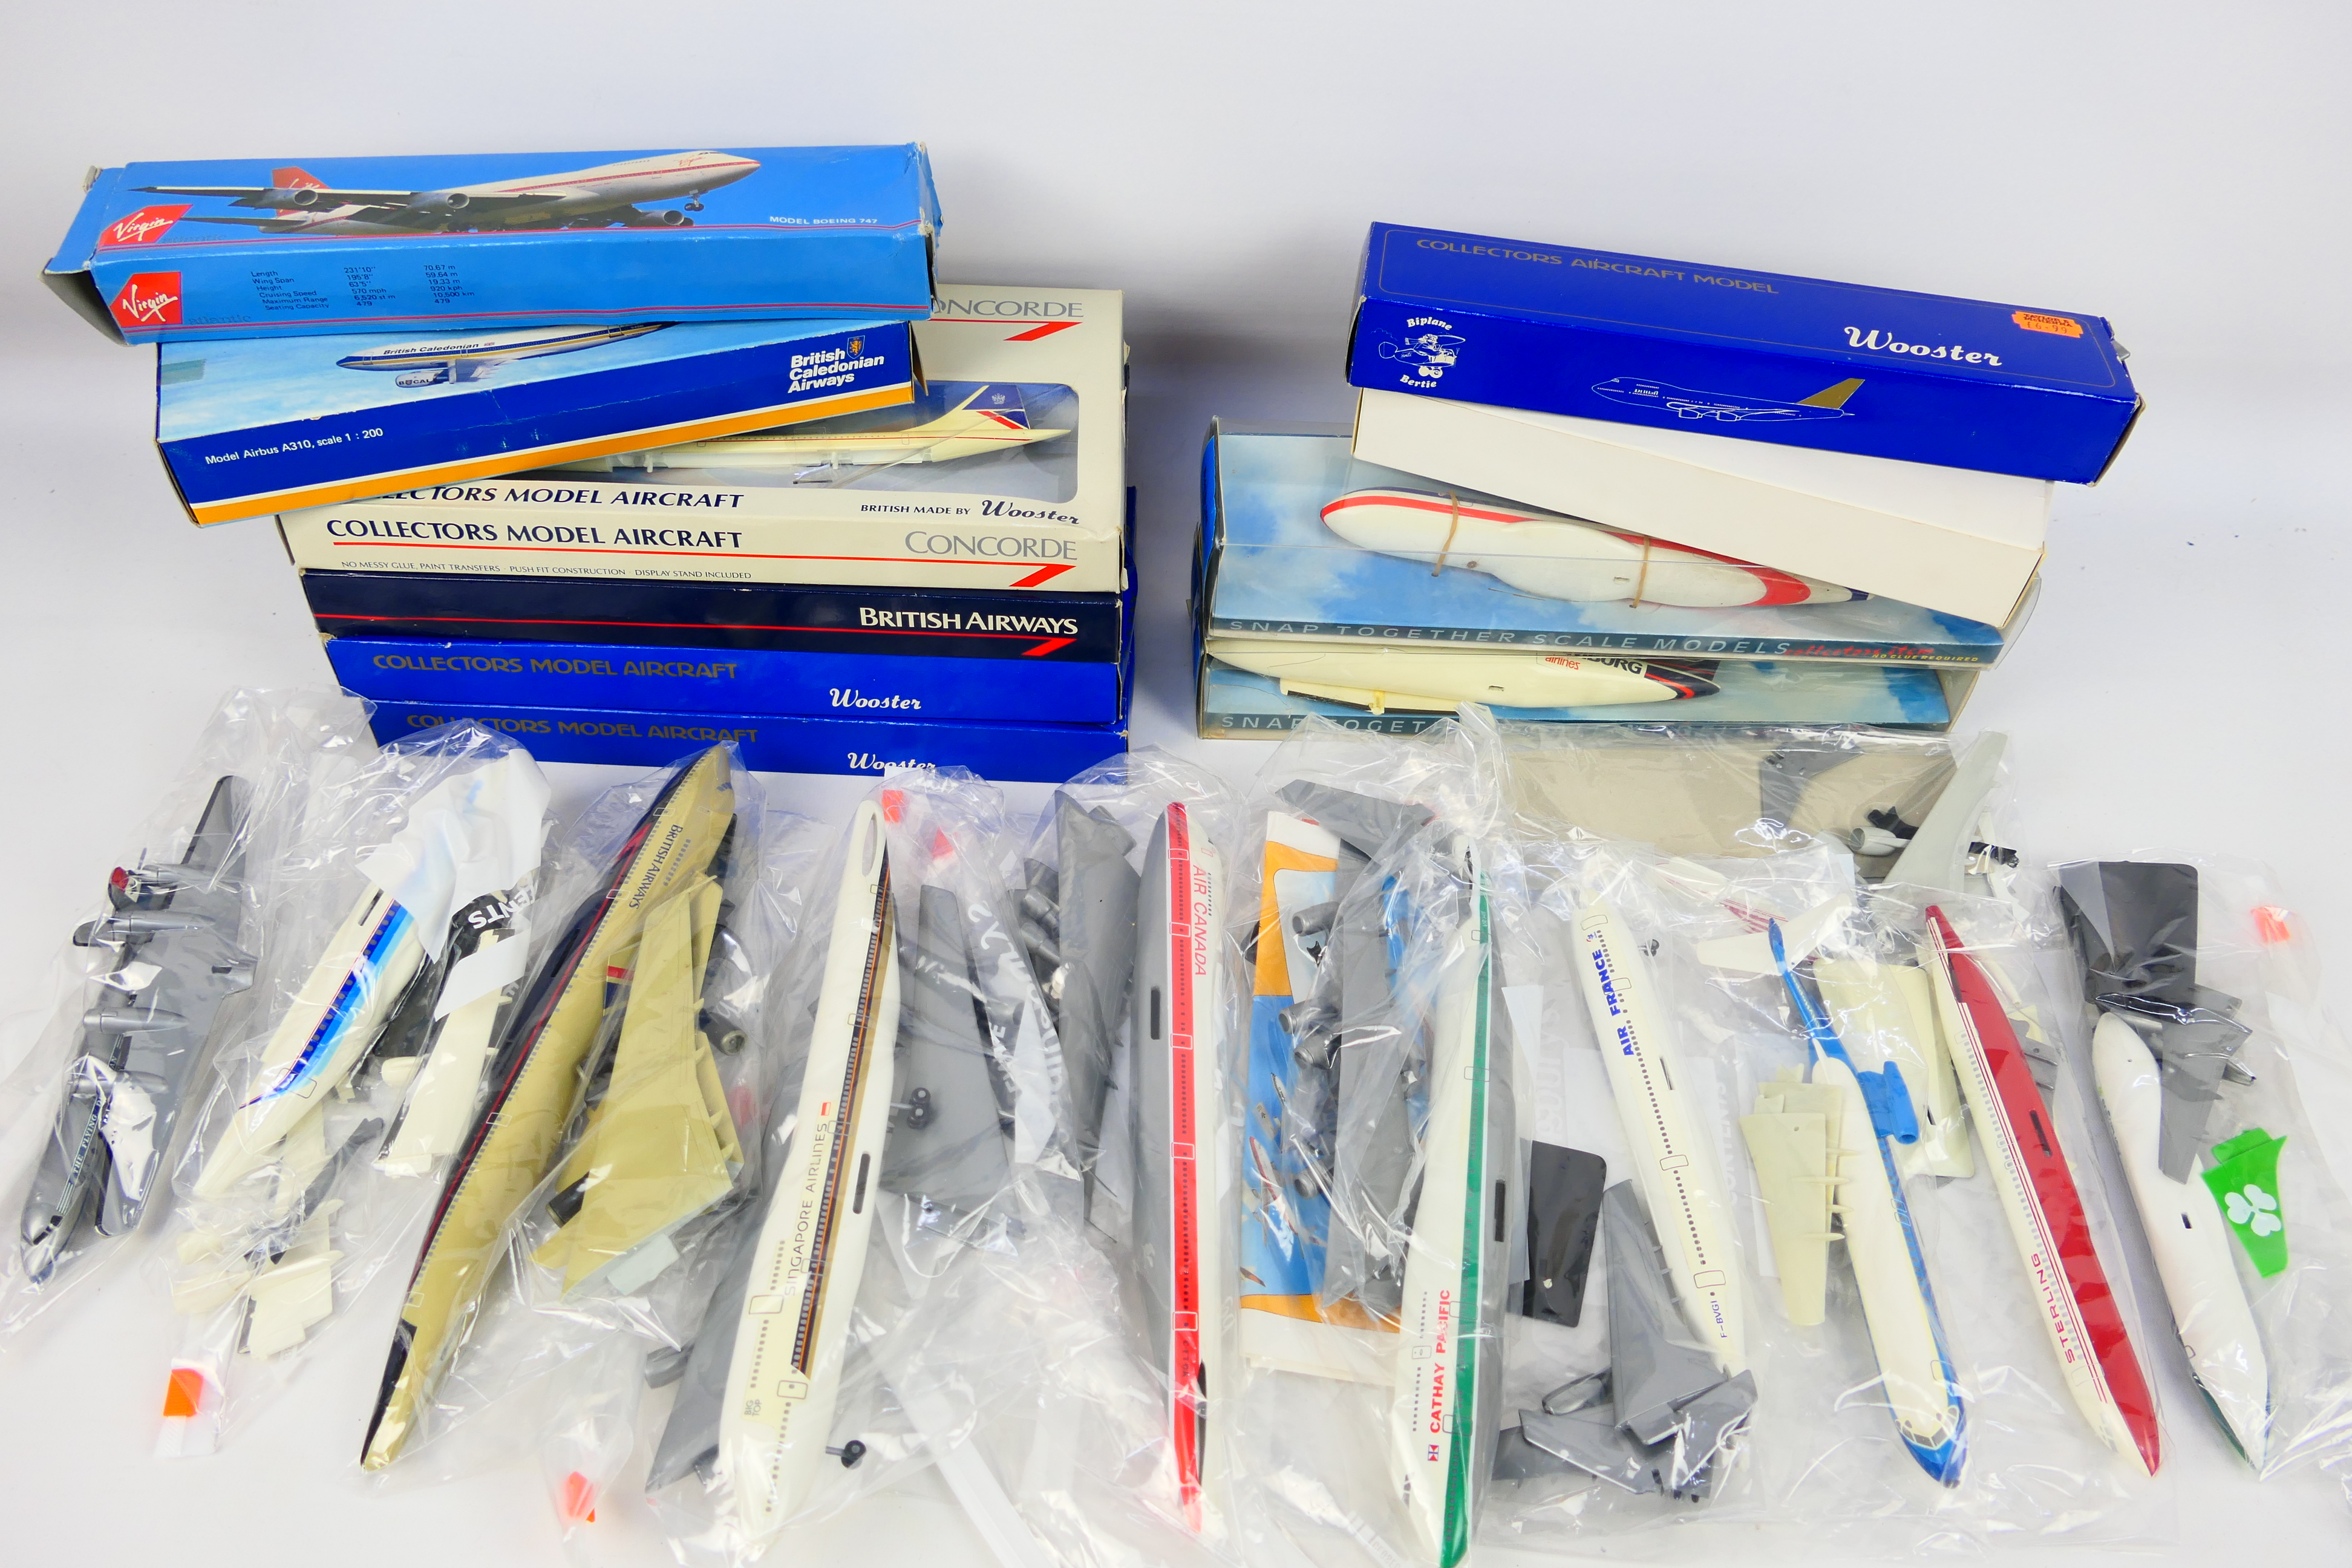 Wooster - Others - A mixed collection of 21 plastic commercial airline model aircraft kits in